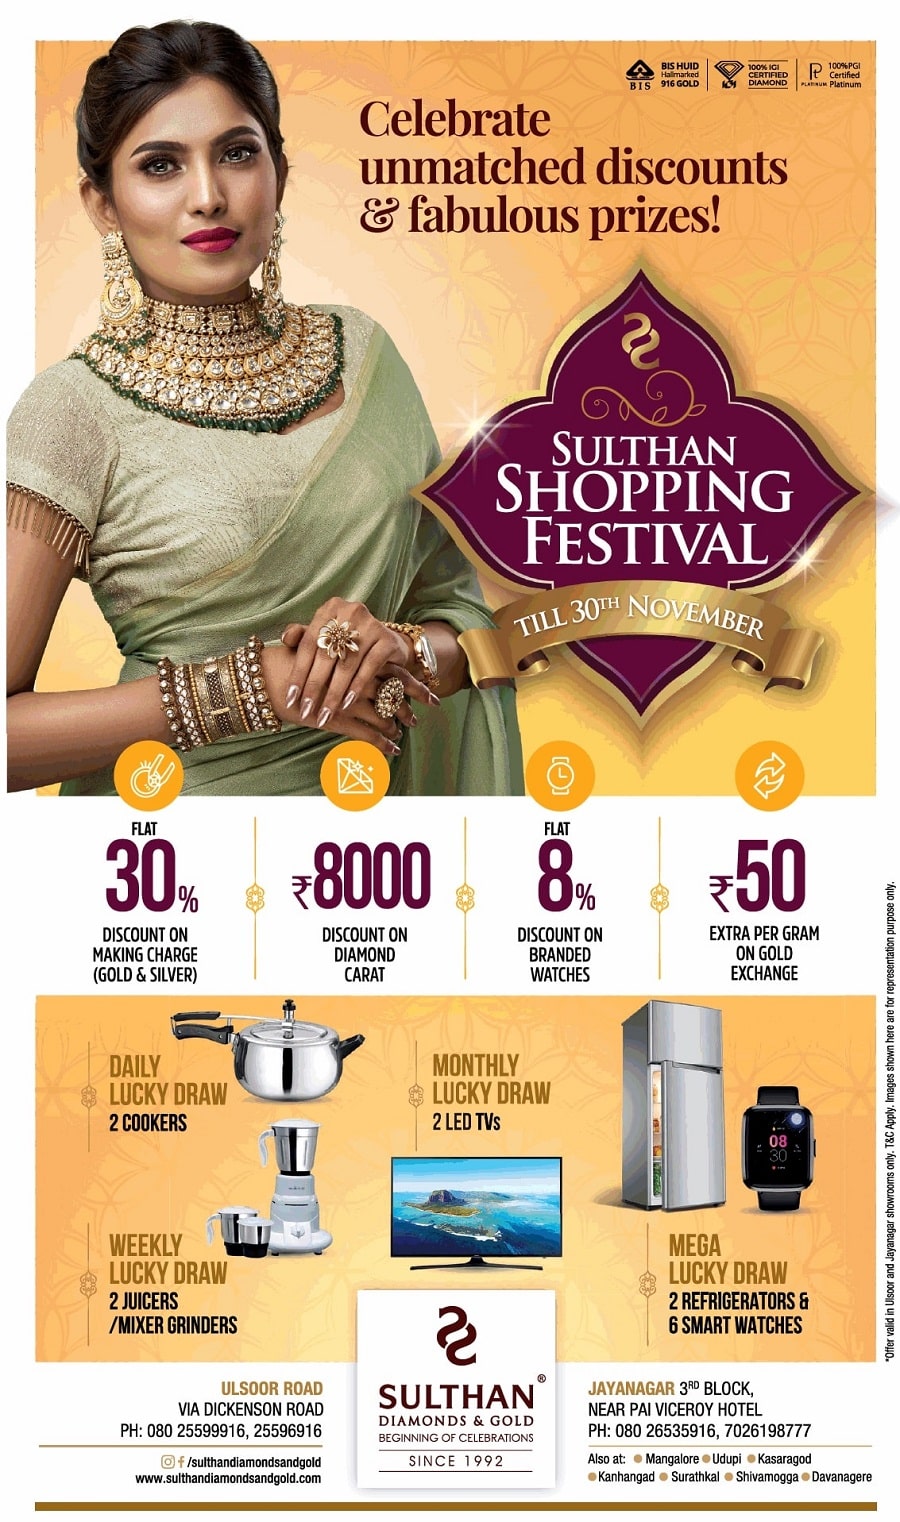 Sulthan Diamonds and Gold Shopping Festival